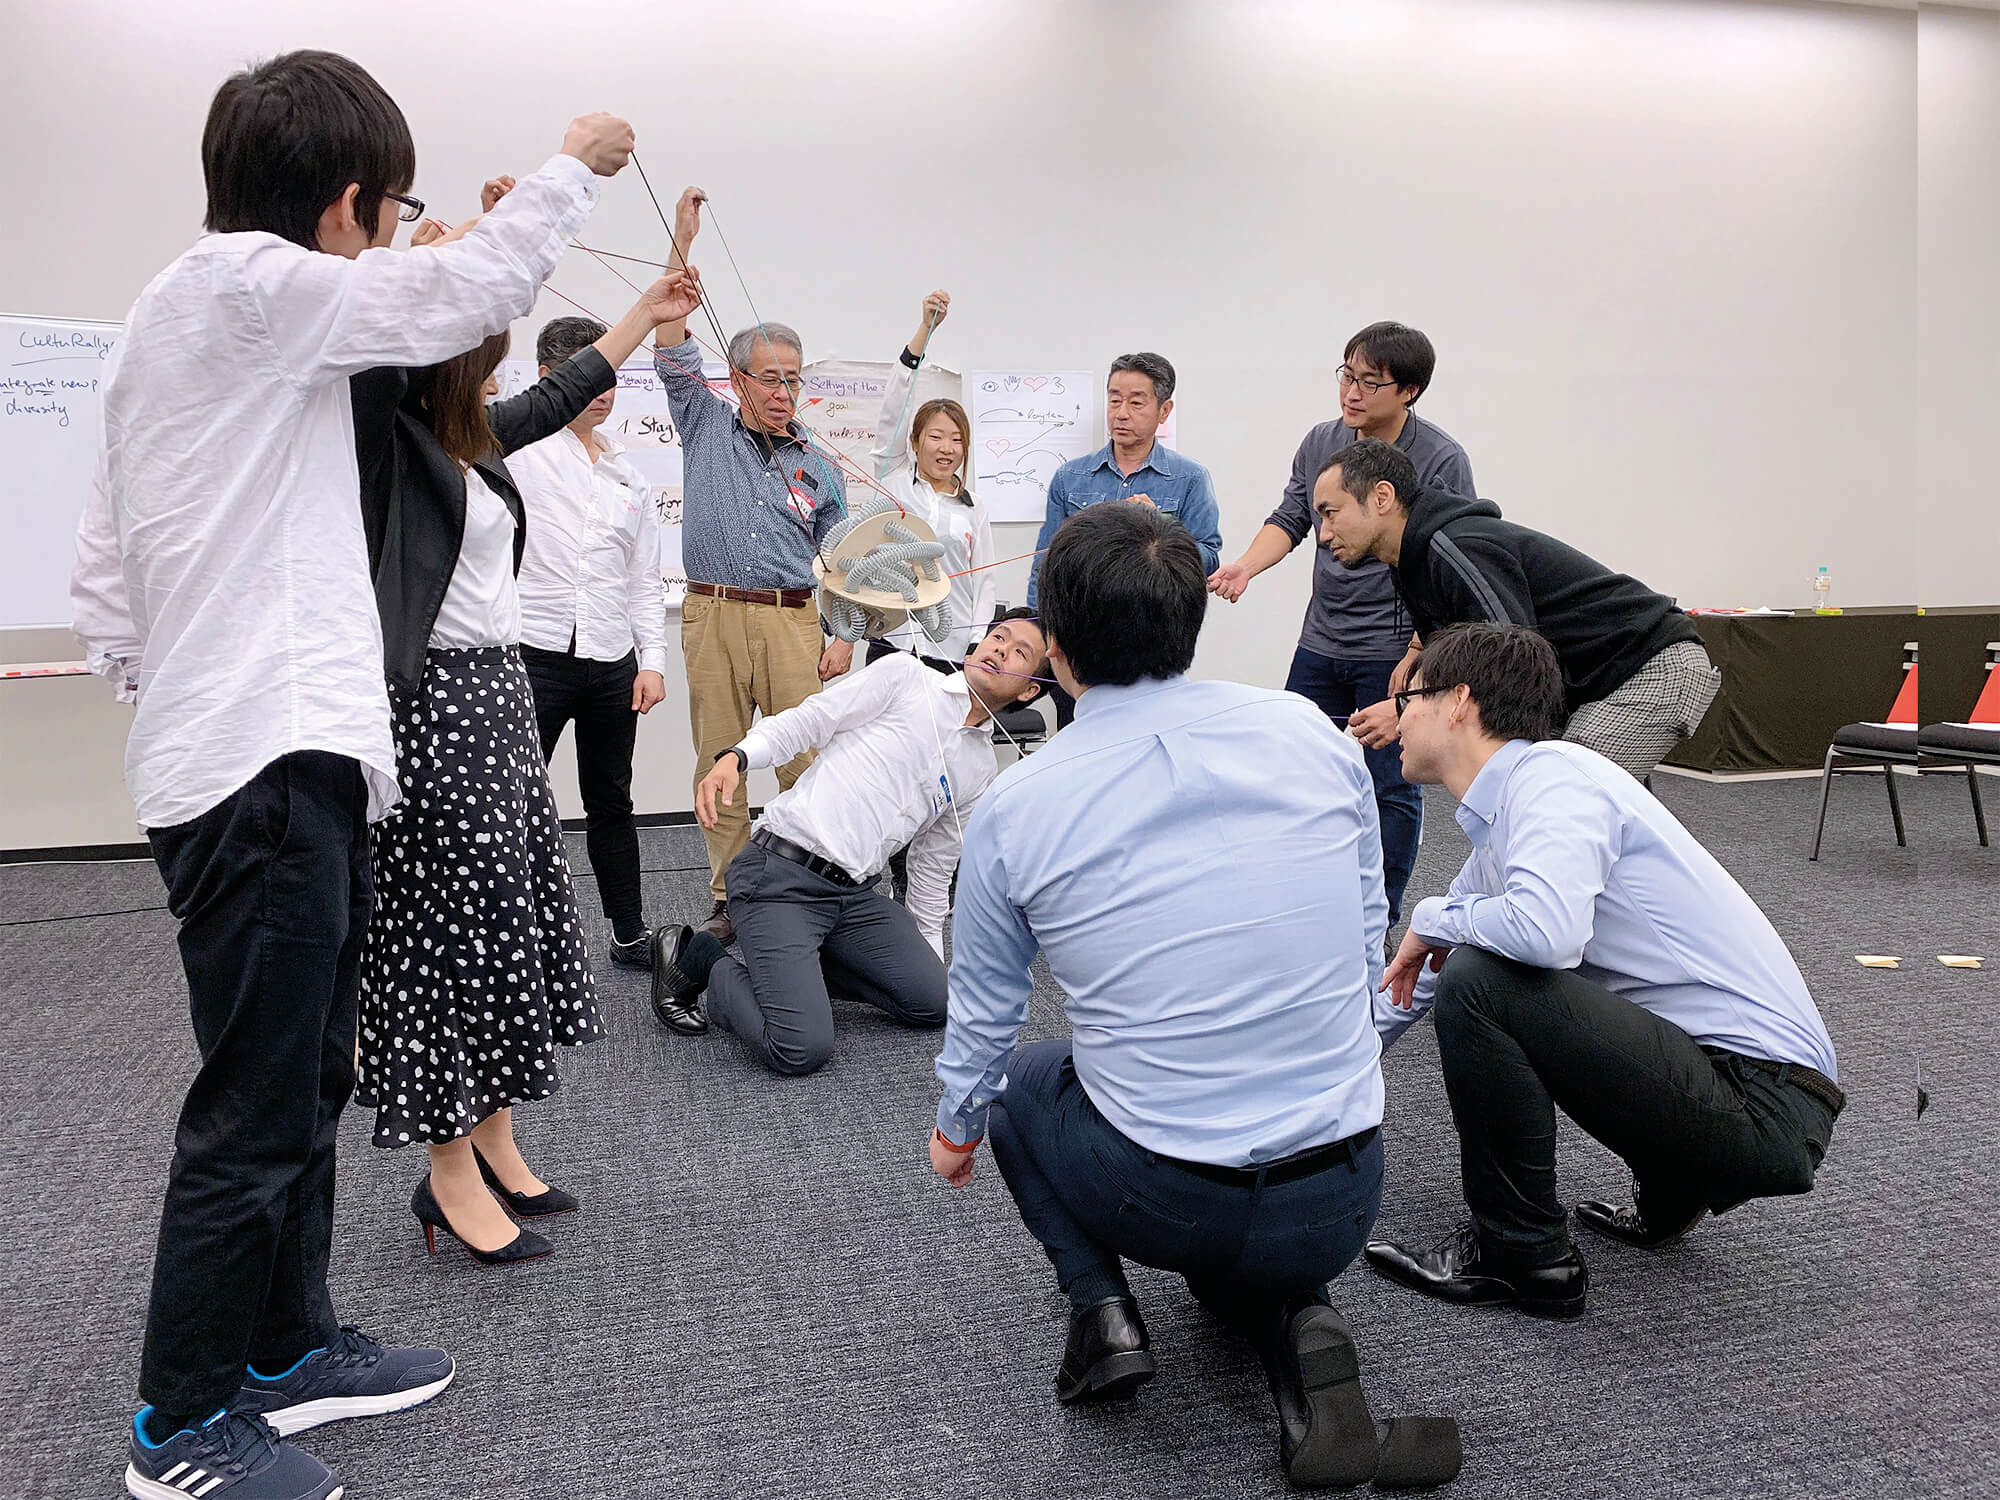 Ten adults in office attire use PerspActive, a team activity made of a 15-inch sphere and 12 strings